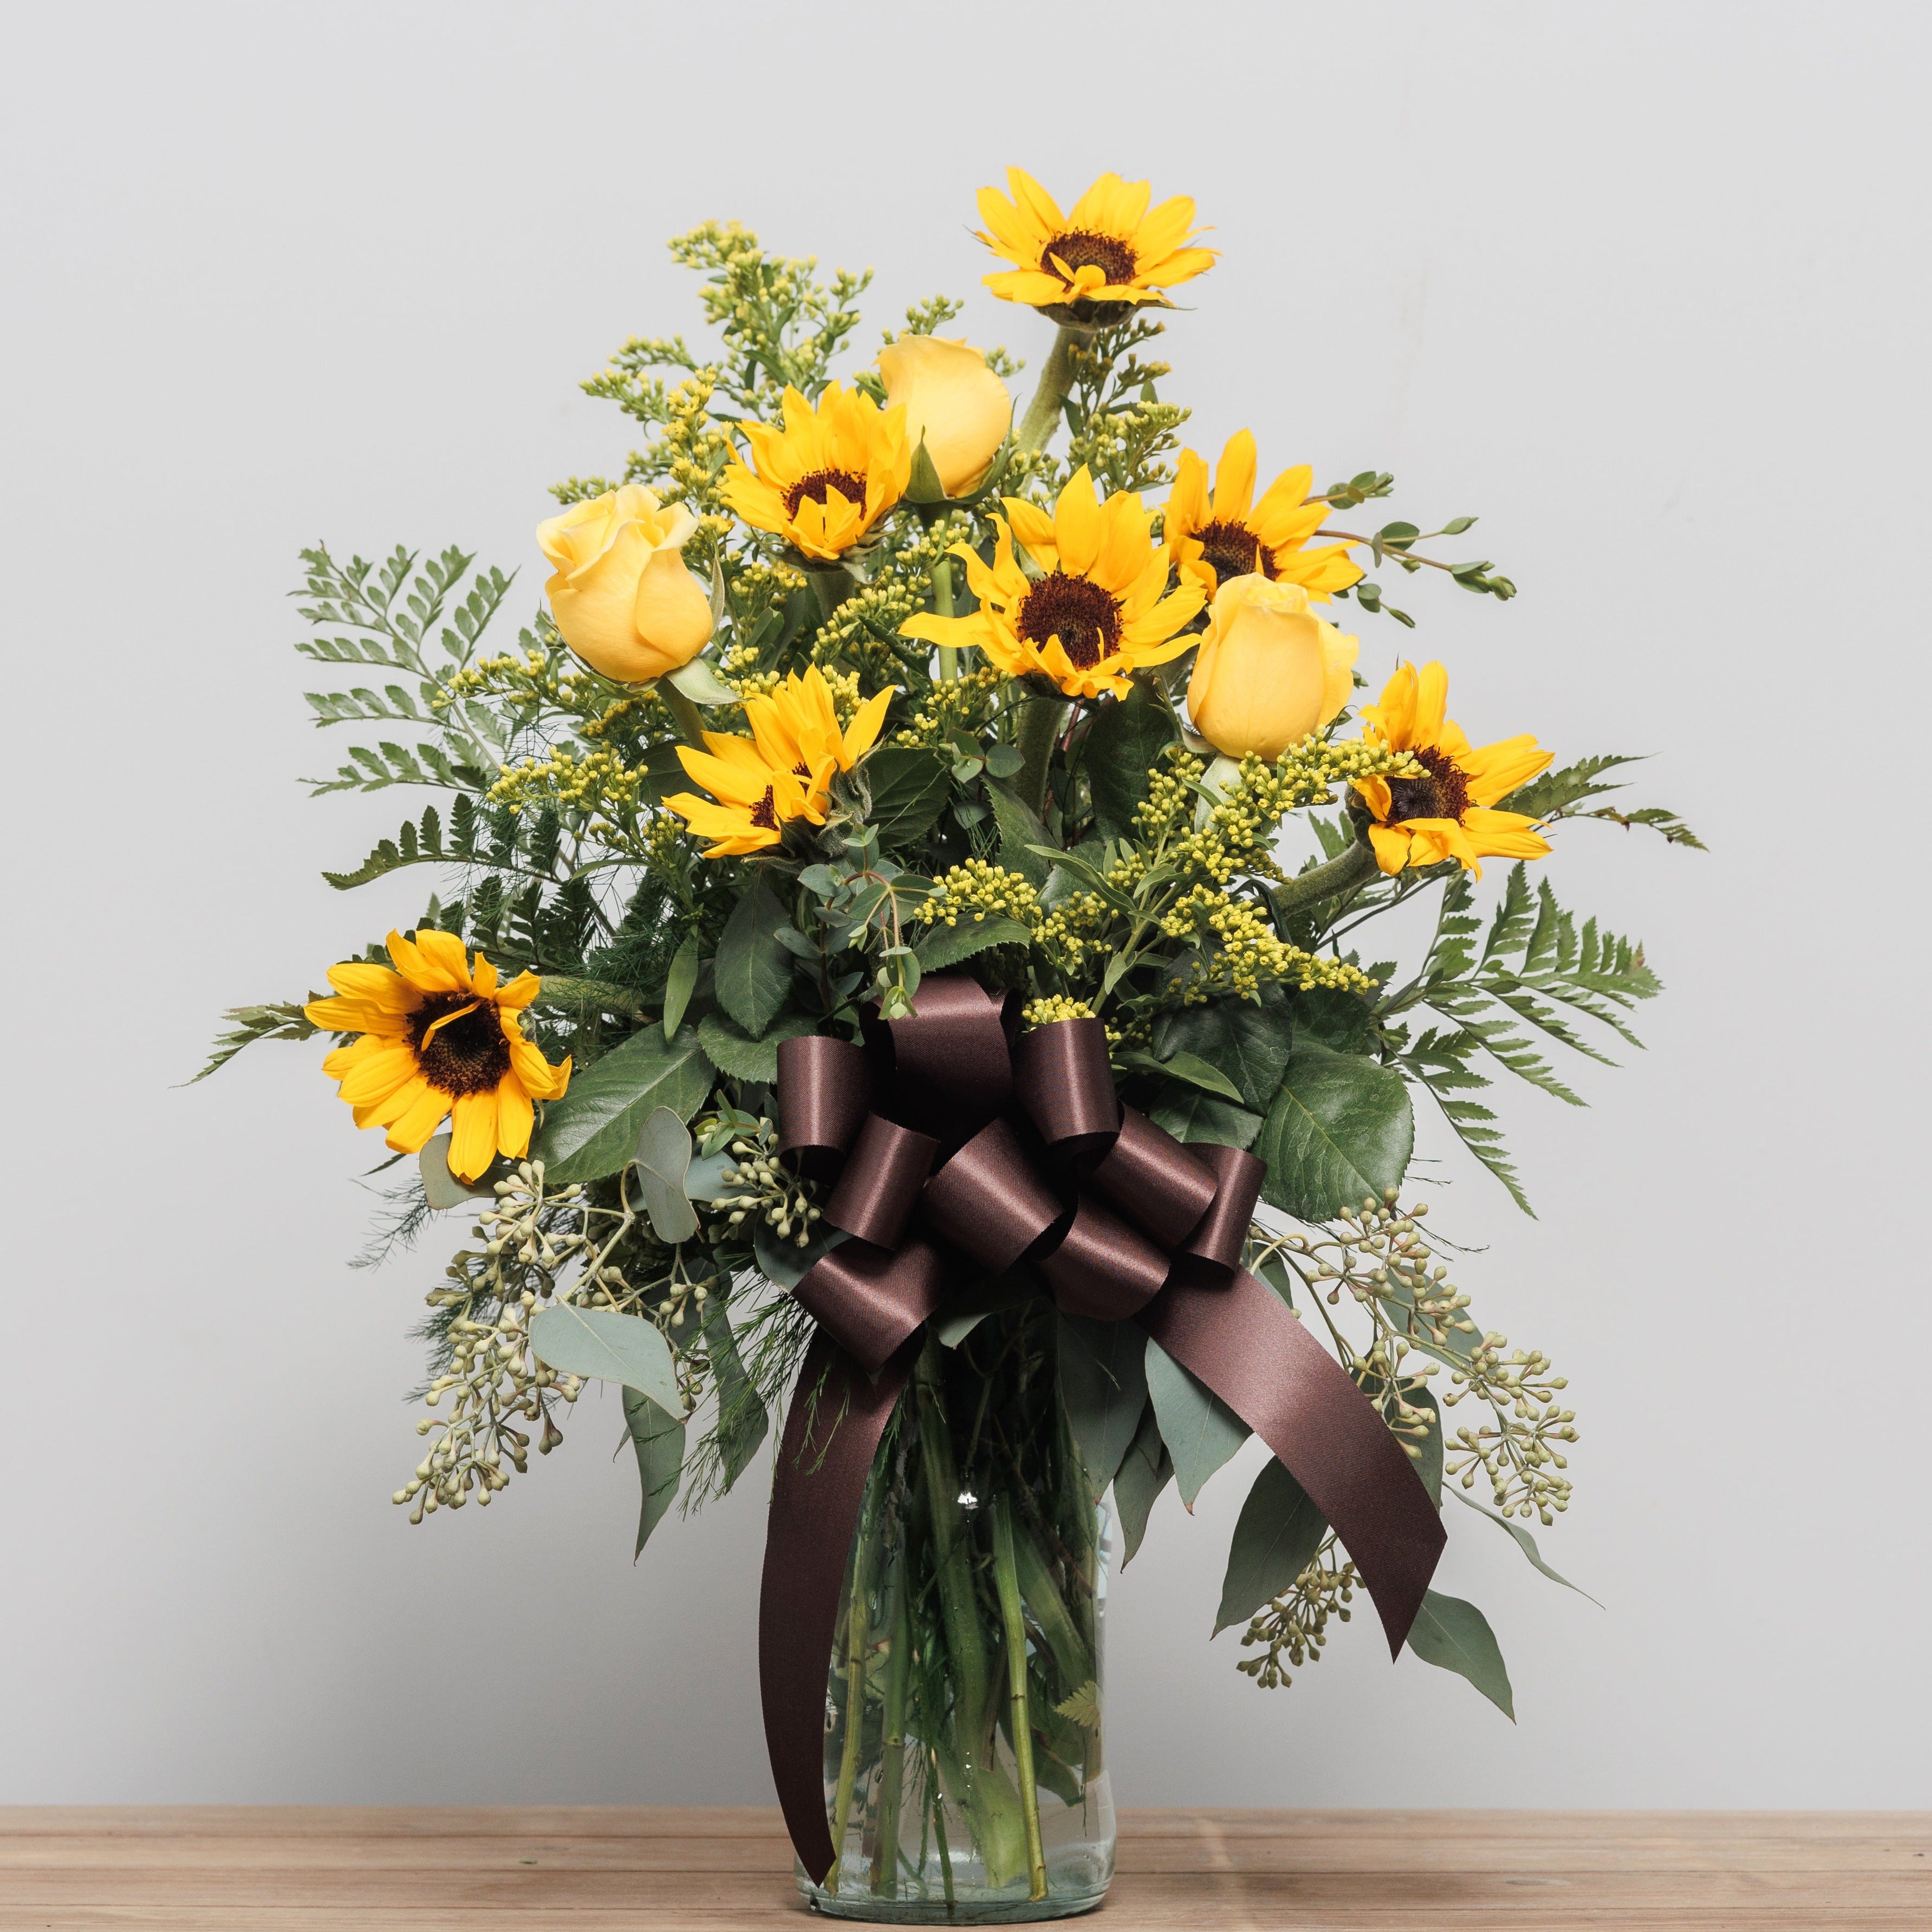 Yellow roses and sunflowers in a vase with a chocolate bow